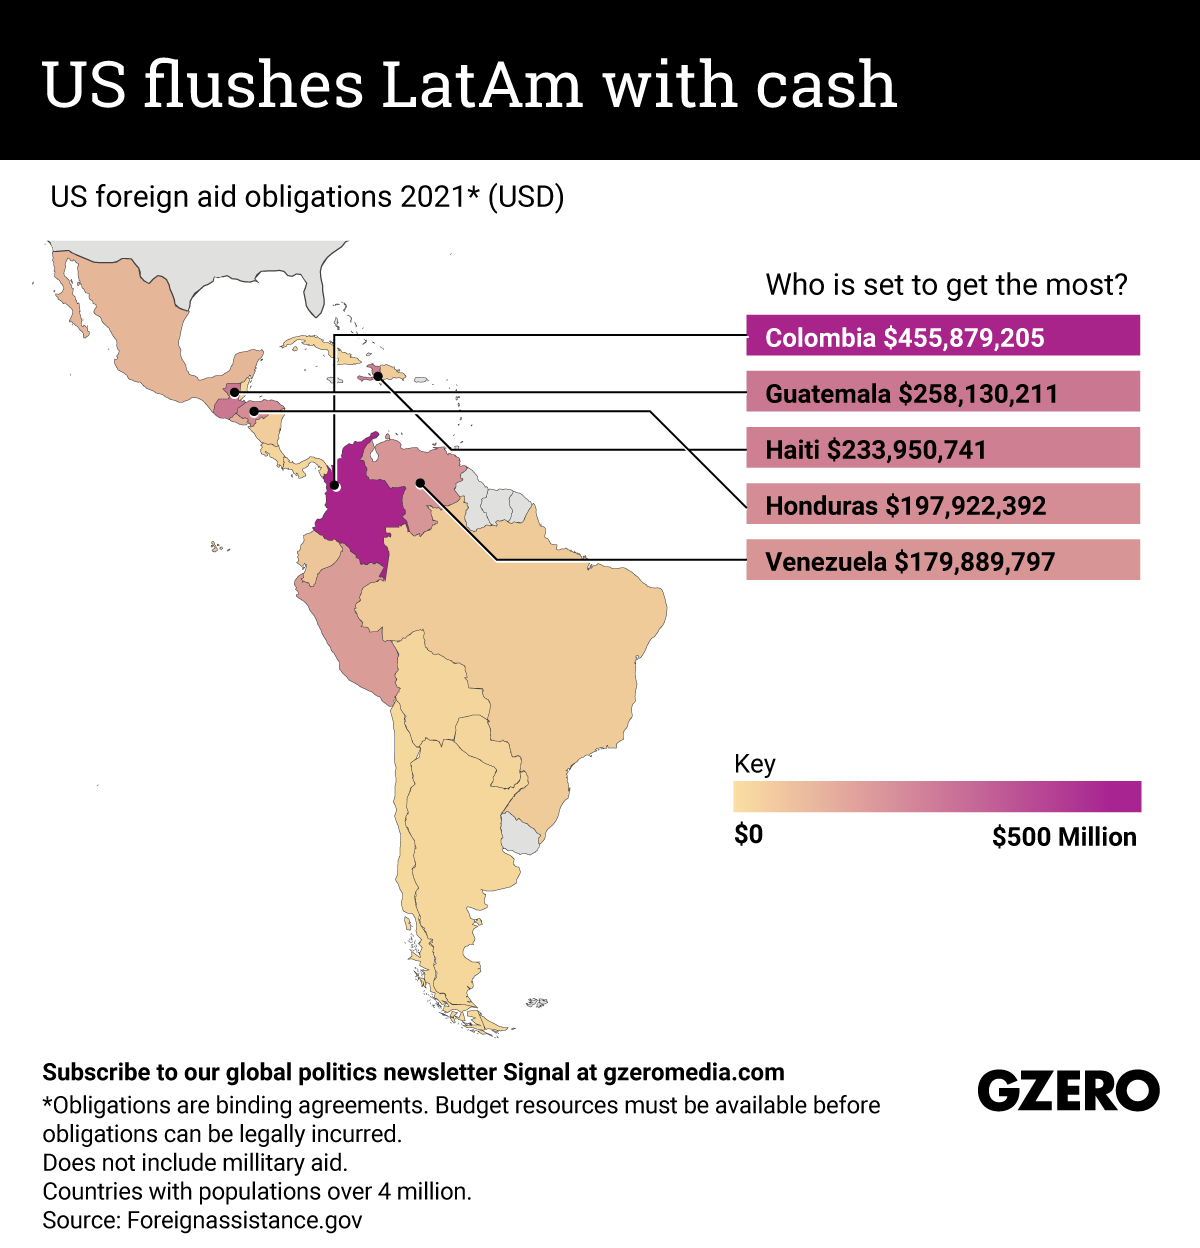 The Graphic Truth: US flushes LatAm with cash